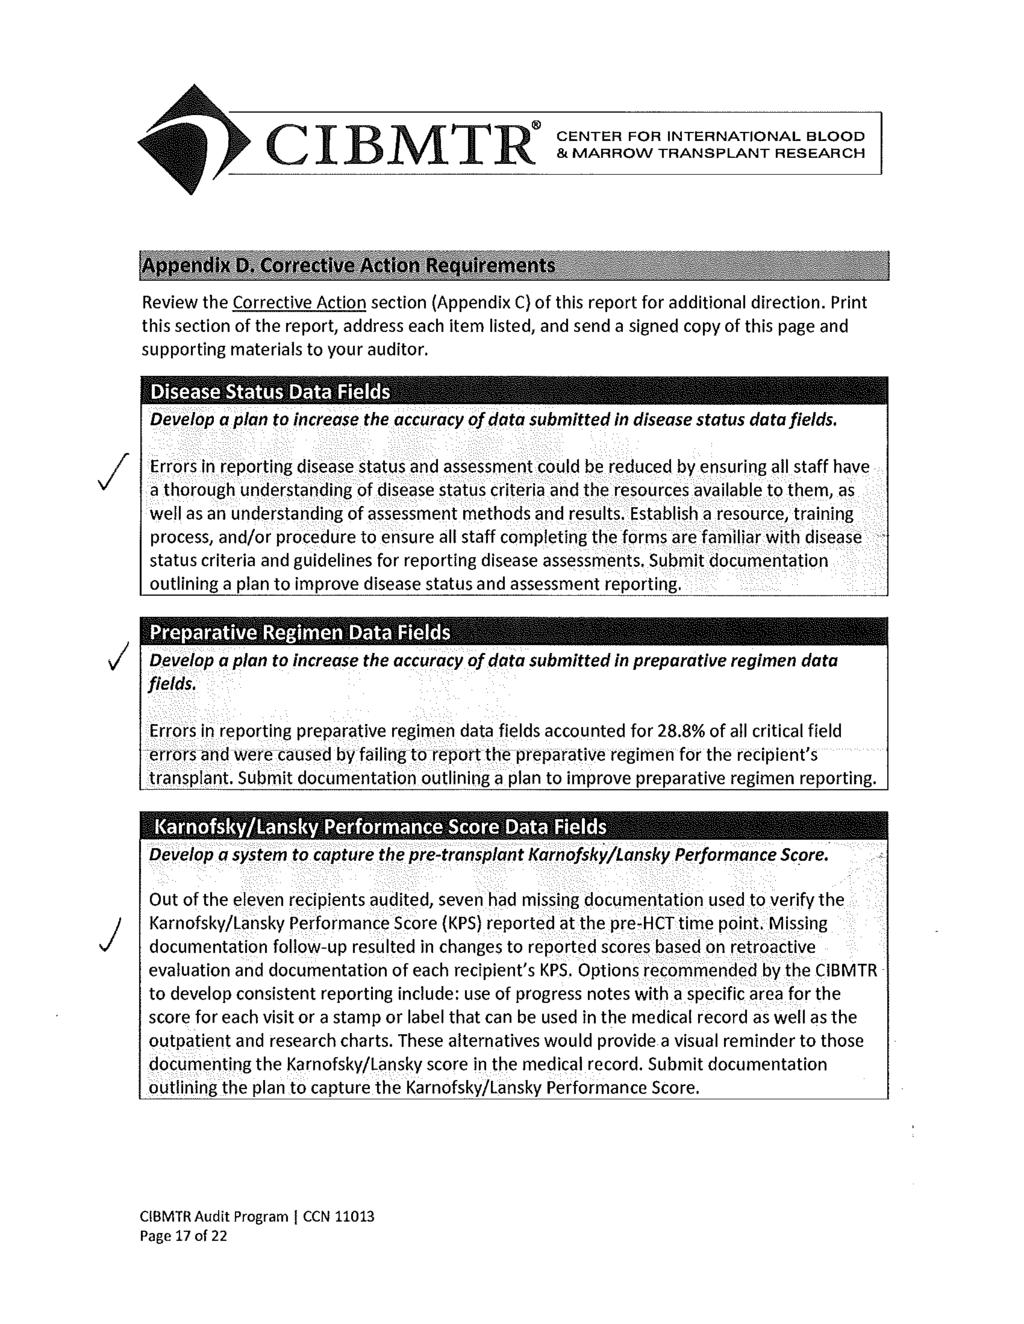 CIBMTR CENTER FOR INTERNATIONAL BLOOD & MARROW TRANSPLANT RESEARCH Review the Corrective Action section (Appendix C} of this report for additional direction.